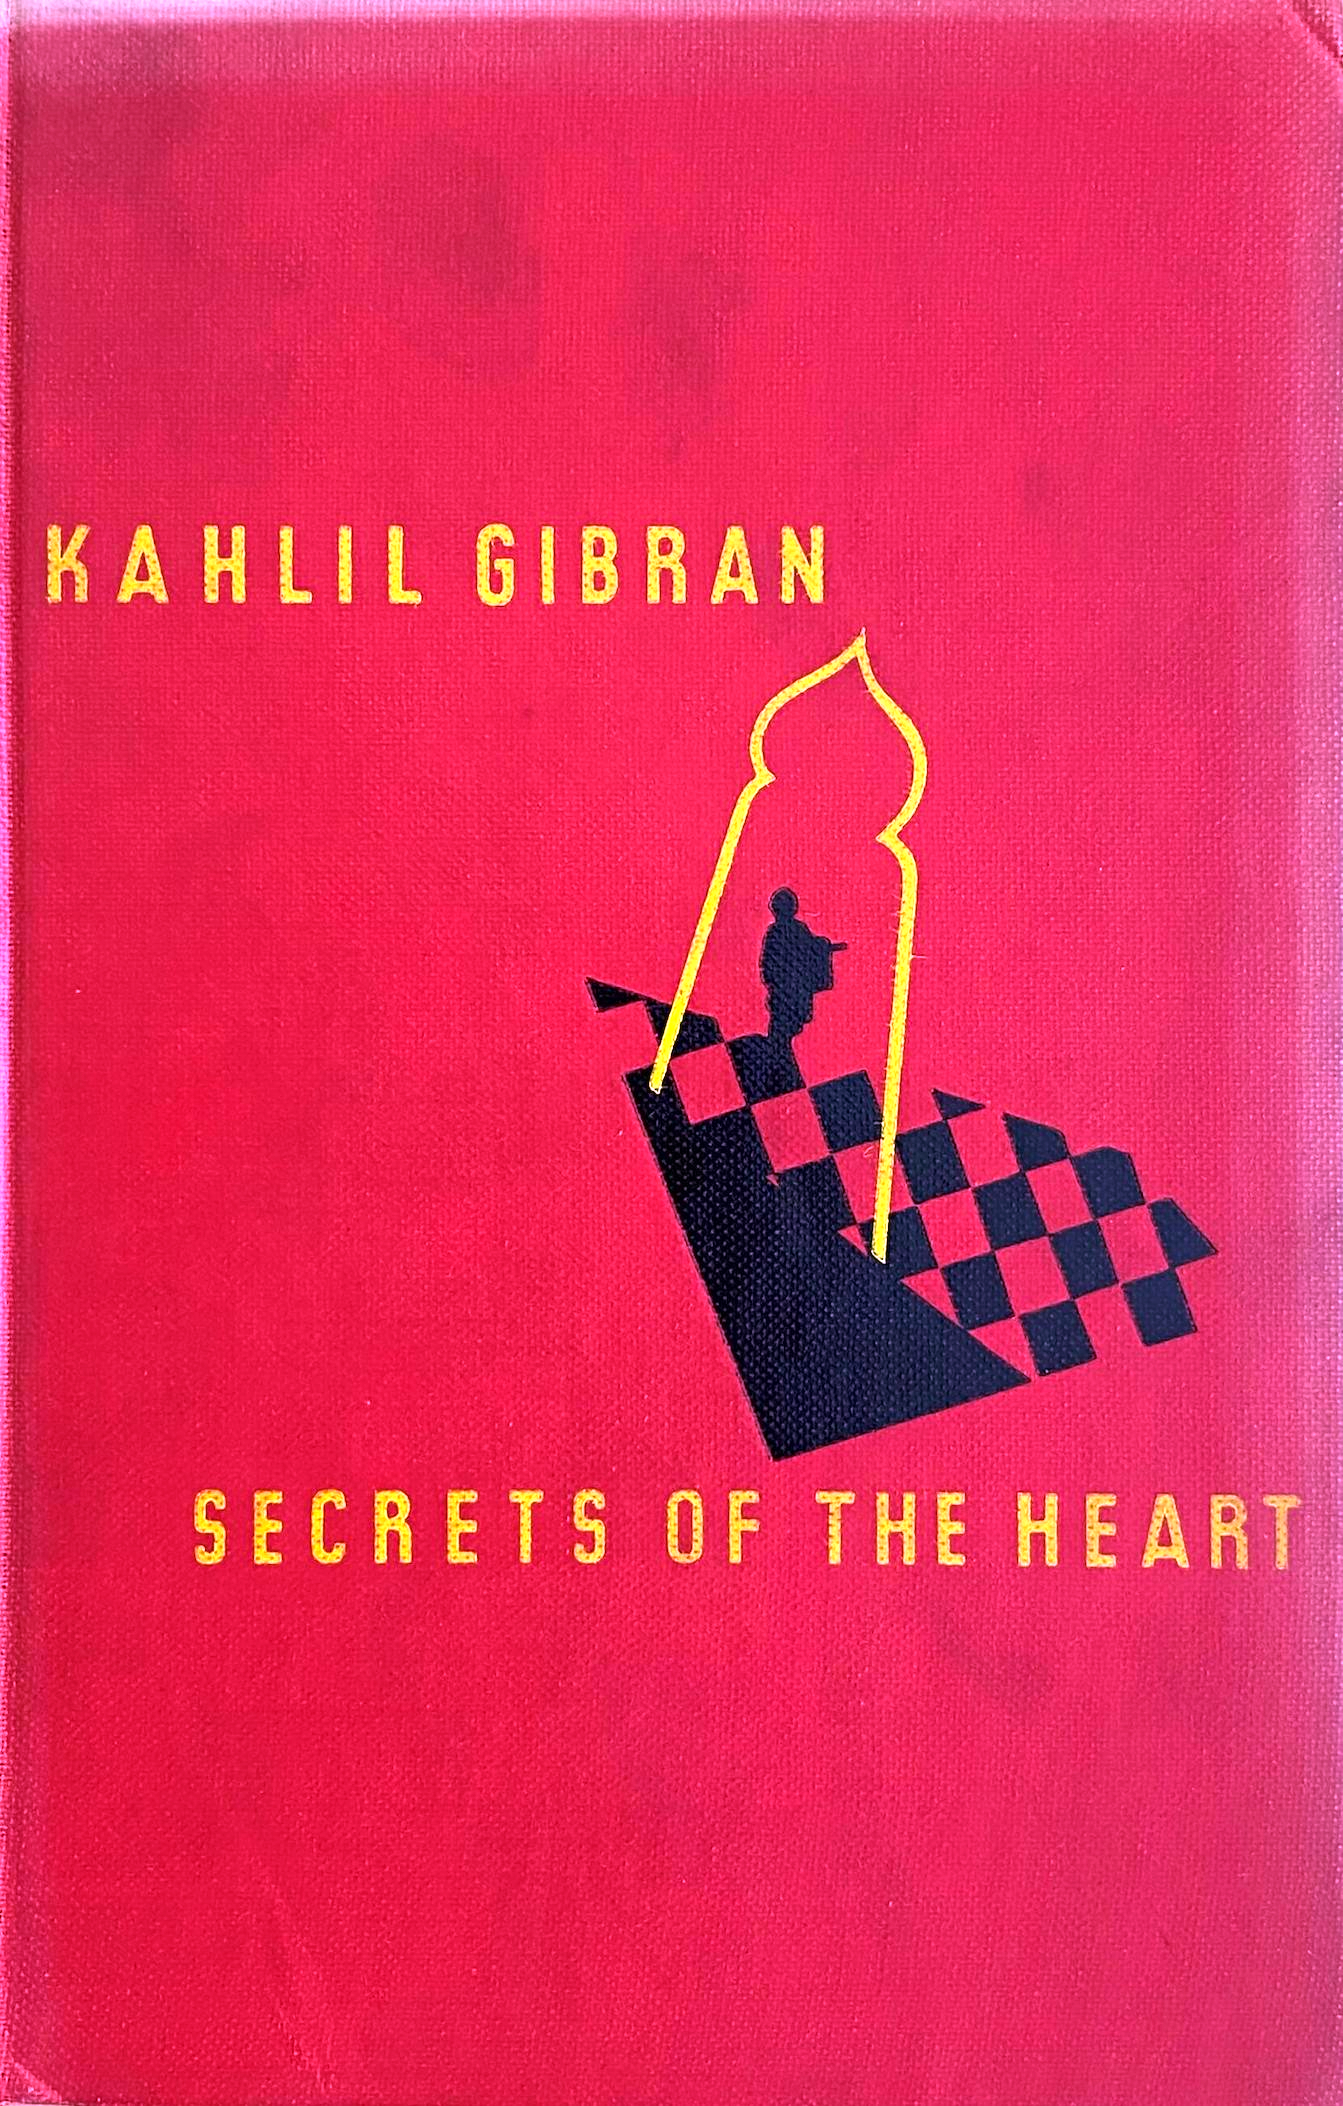 Secrets of The Heart - A collection of works as translated by Anthony Rizcallah Ferris, 1947 